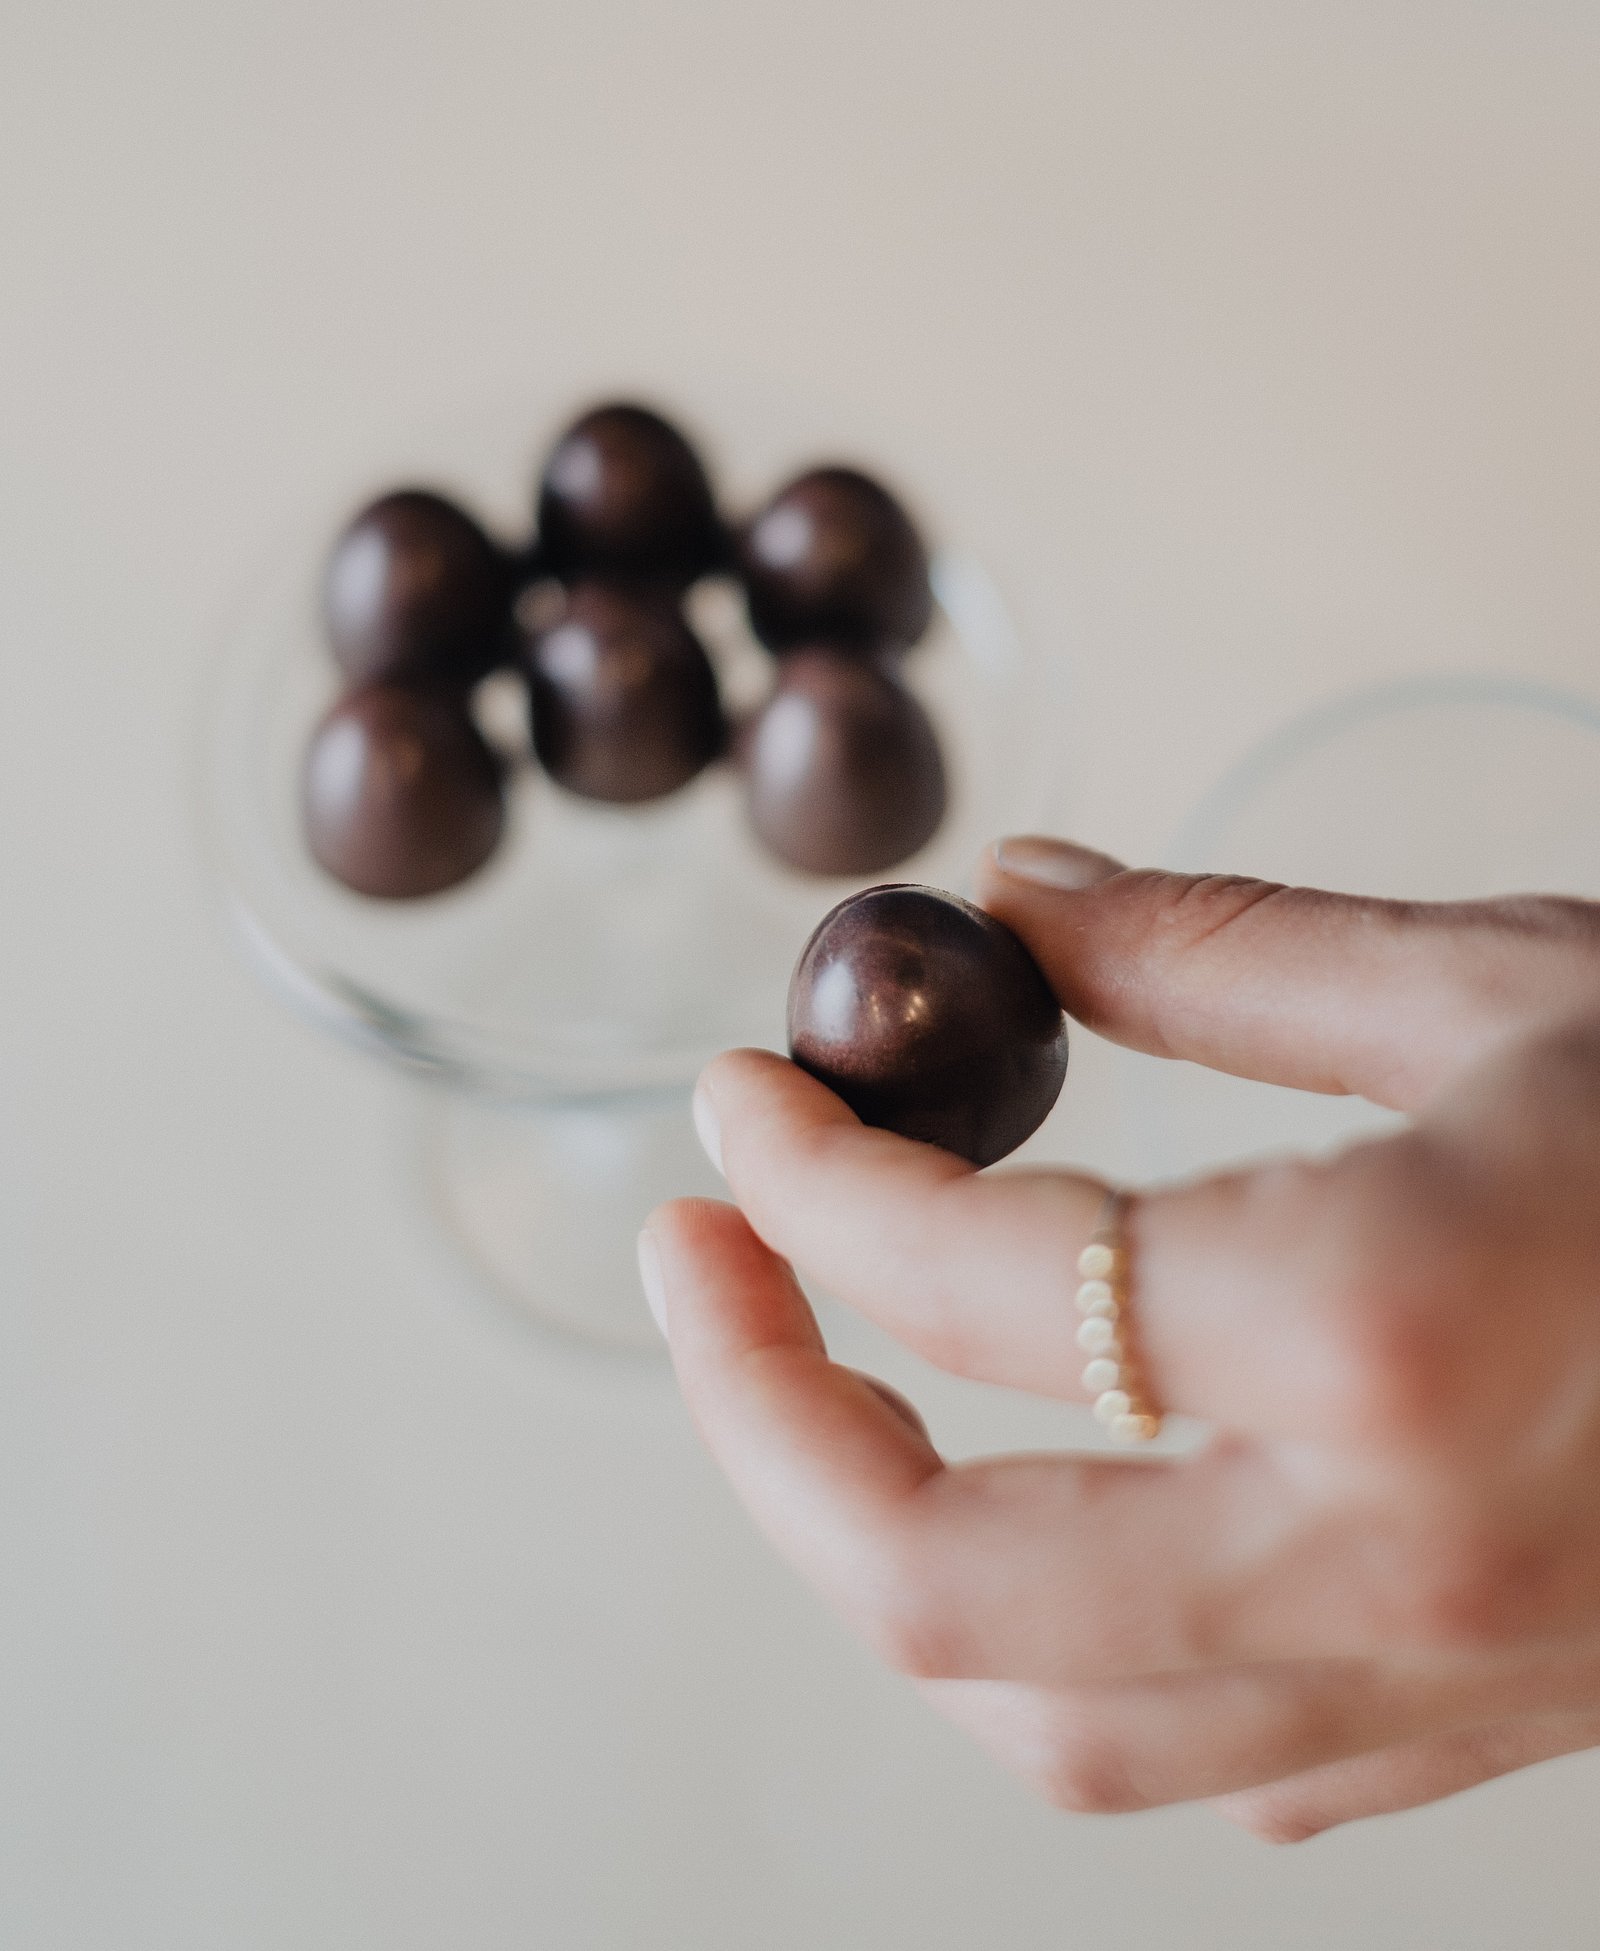 Handmade chocolates and truffles, classic or creative, plain or with rum or orange filling… Little treasures for treating yourself or someone you love. And if you have something special in mind, we can make it to order!